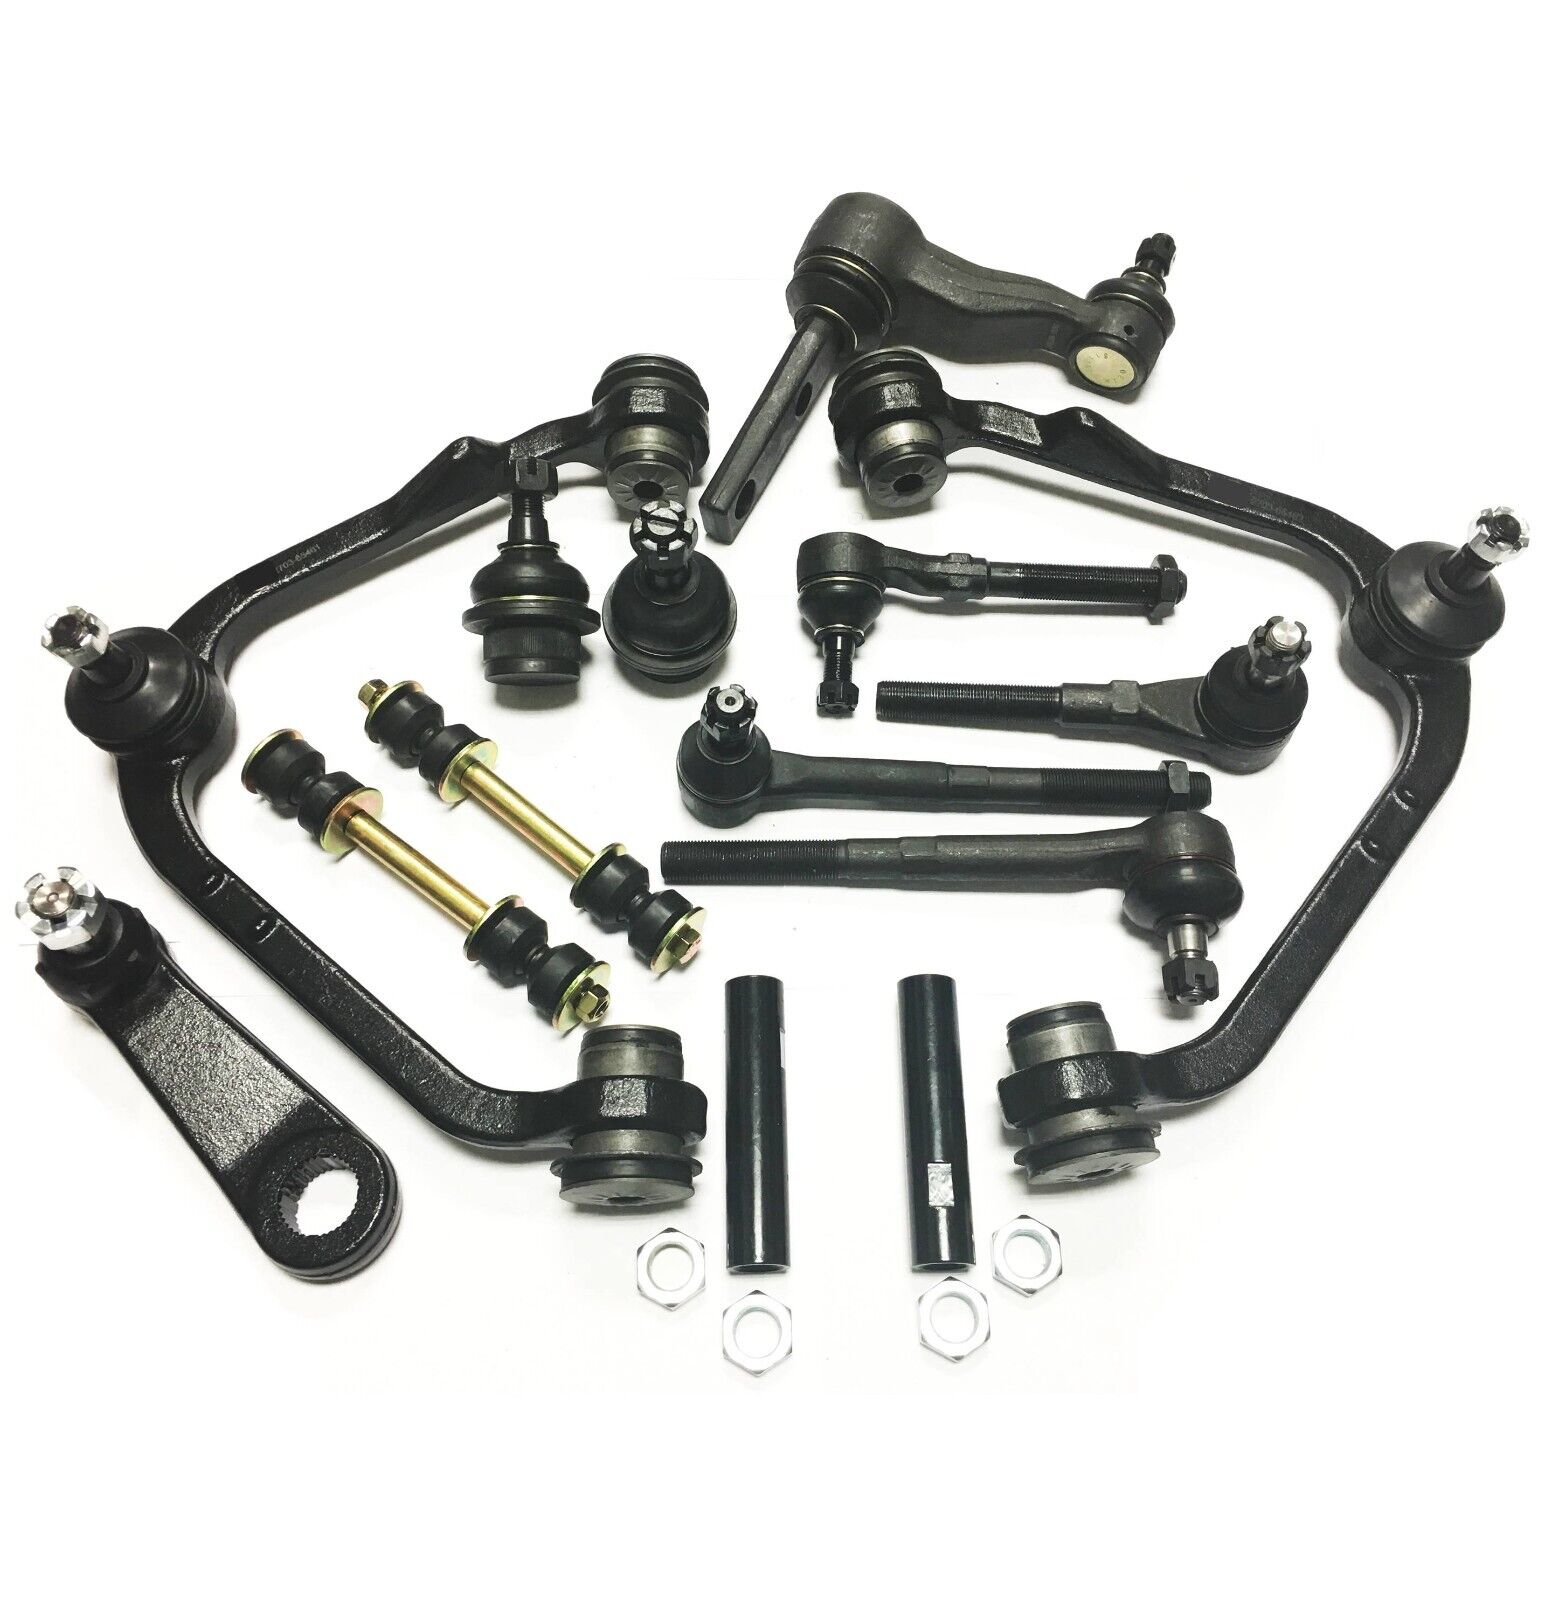 20 Pc Complete Front Suspension Kit for Ford F-150 F-250 Expedition Lincon 2WD